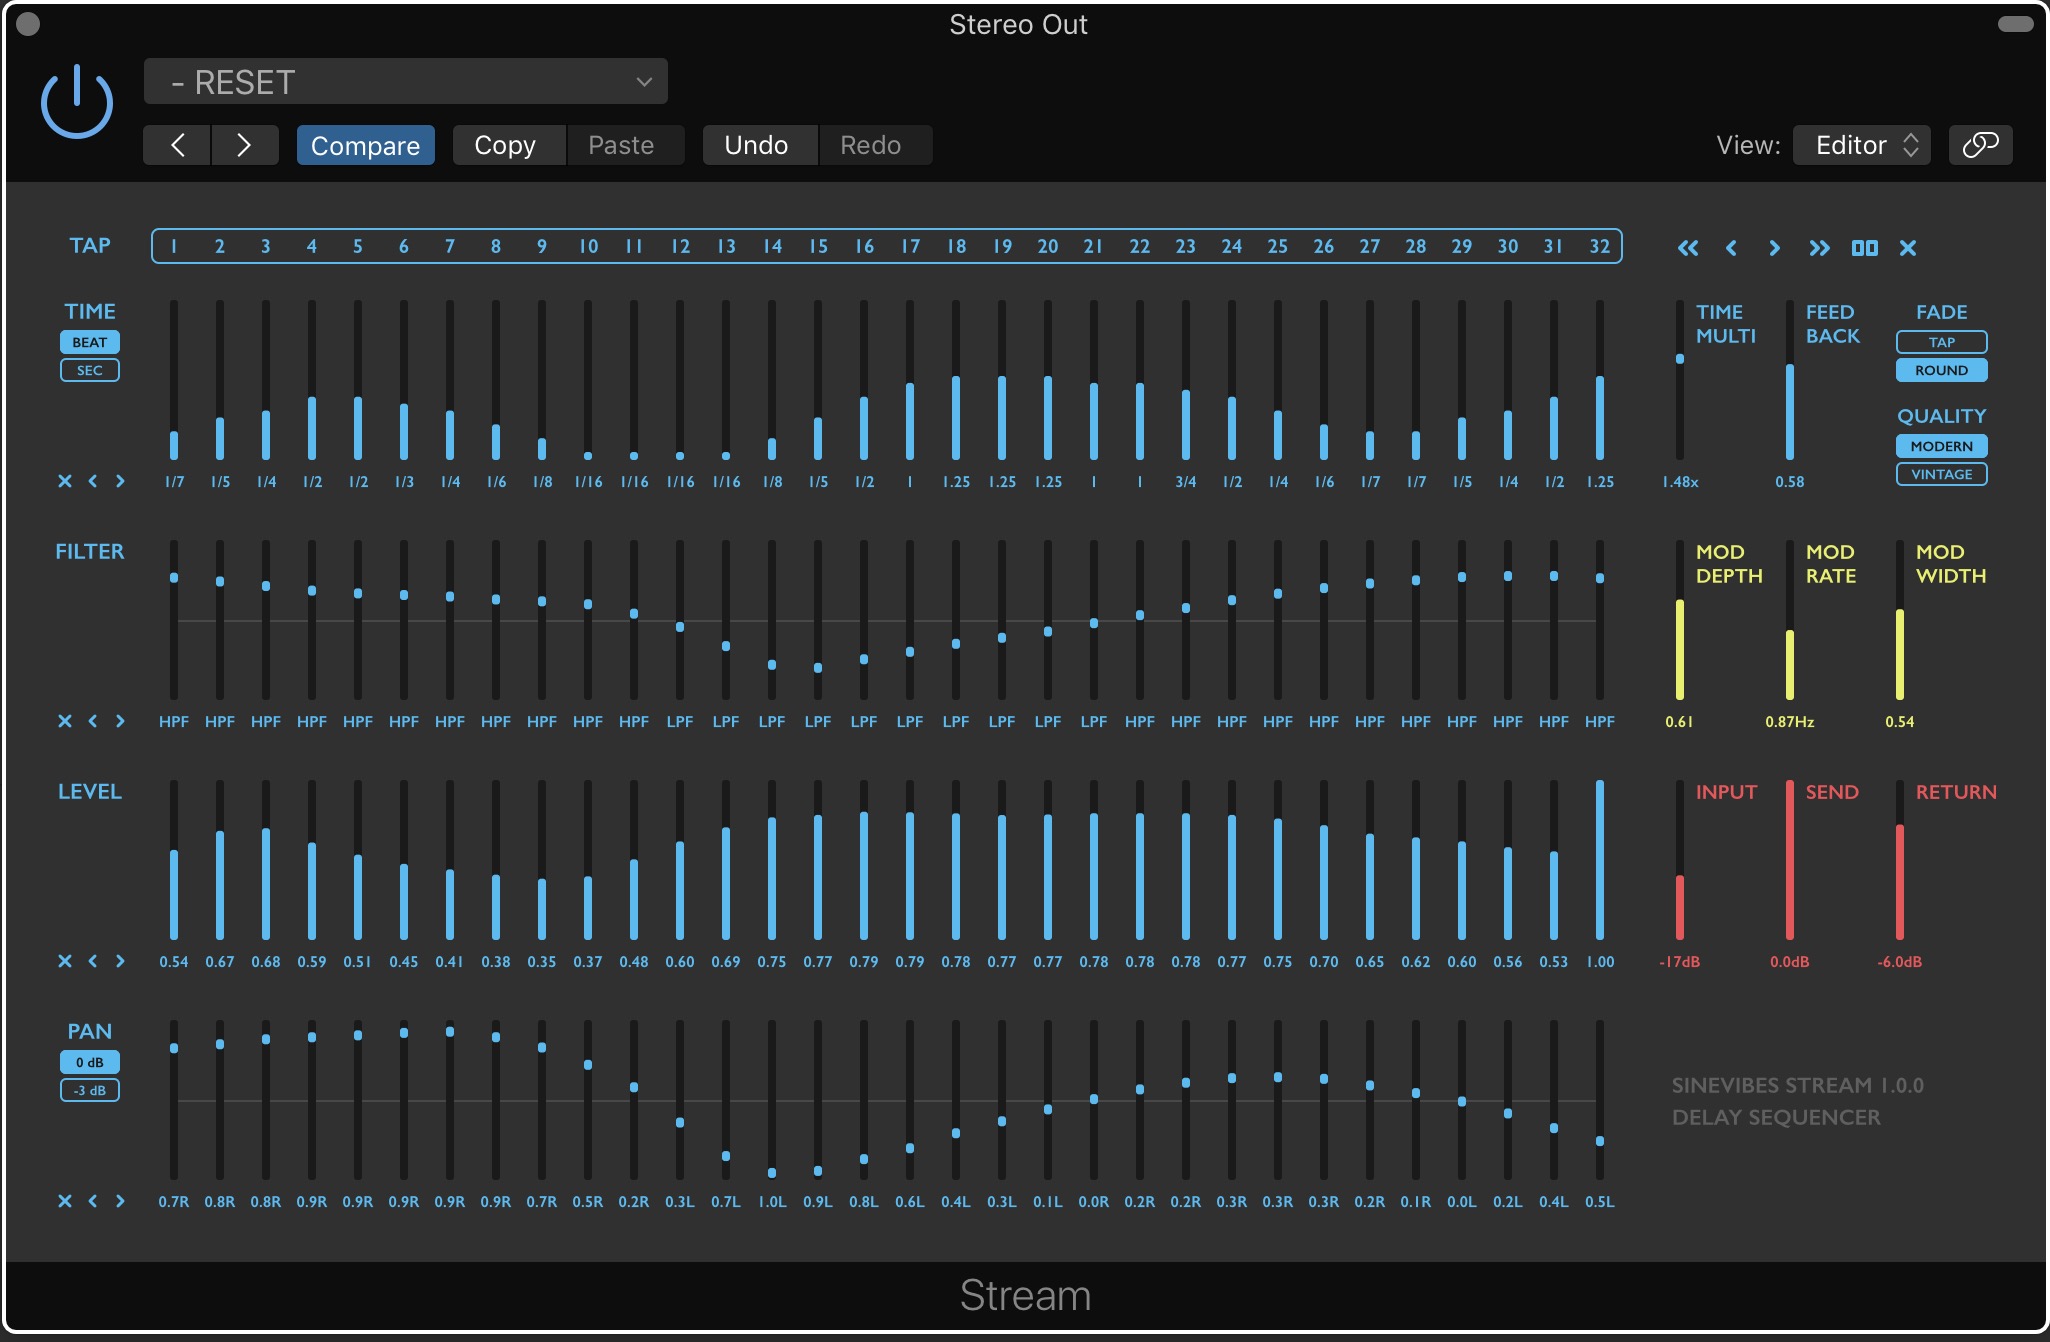 Stream a Delay Sequencer by Sinevibes Main